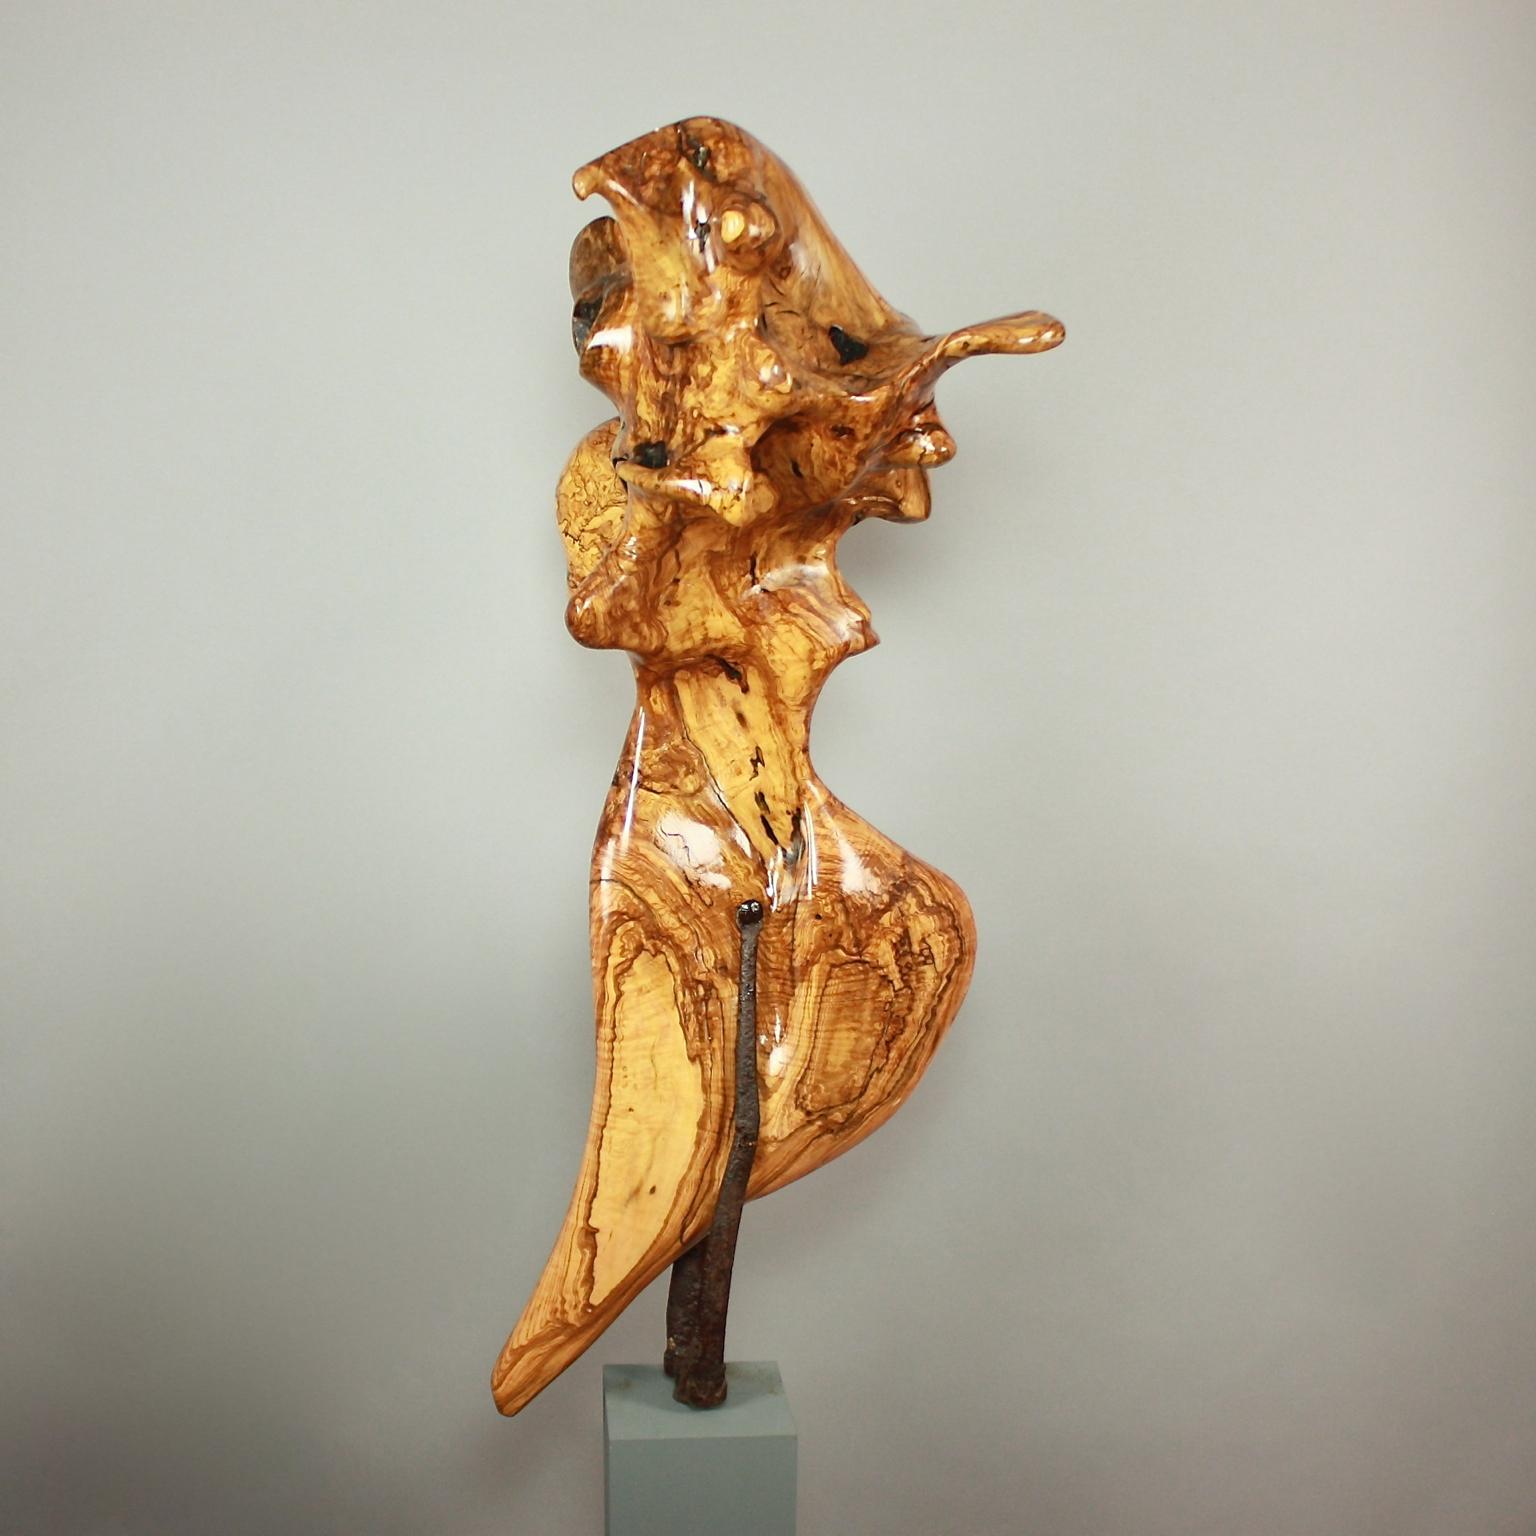 An abstract olivewood sculpture by an unknown artist, probably late 20th century or early 21st century. Following the grain of the wood the sculpture offers multiple views of the polished surface accentuating the vivid grain. The root structure of